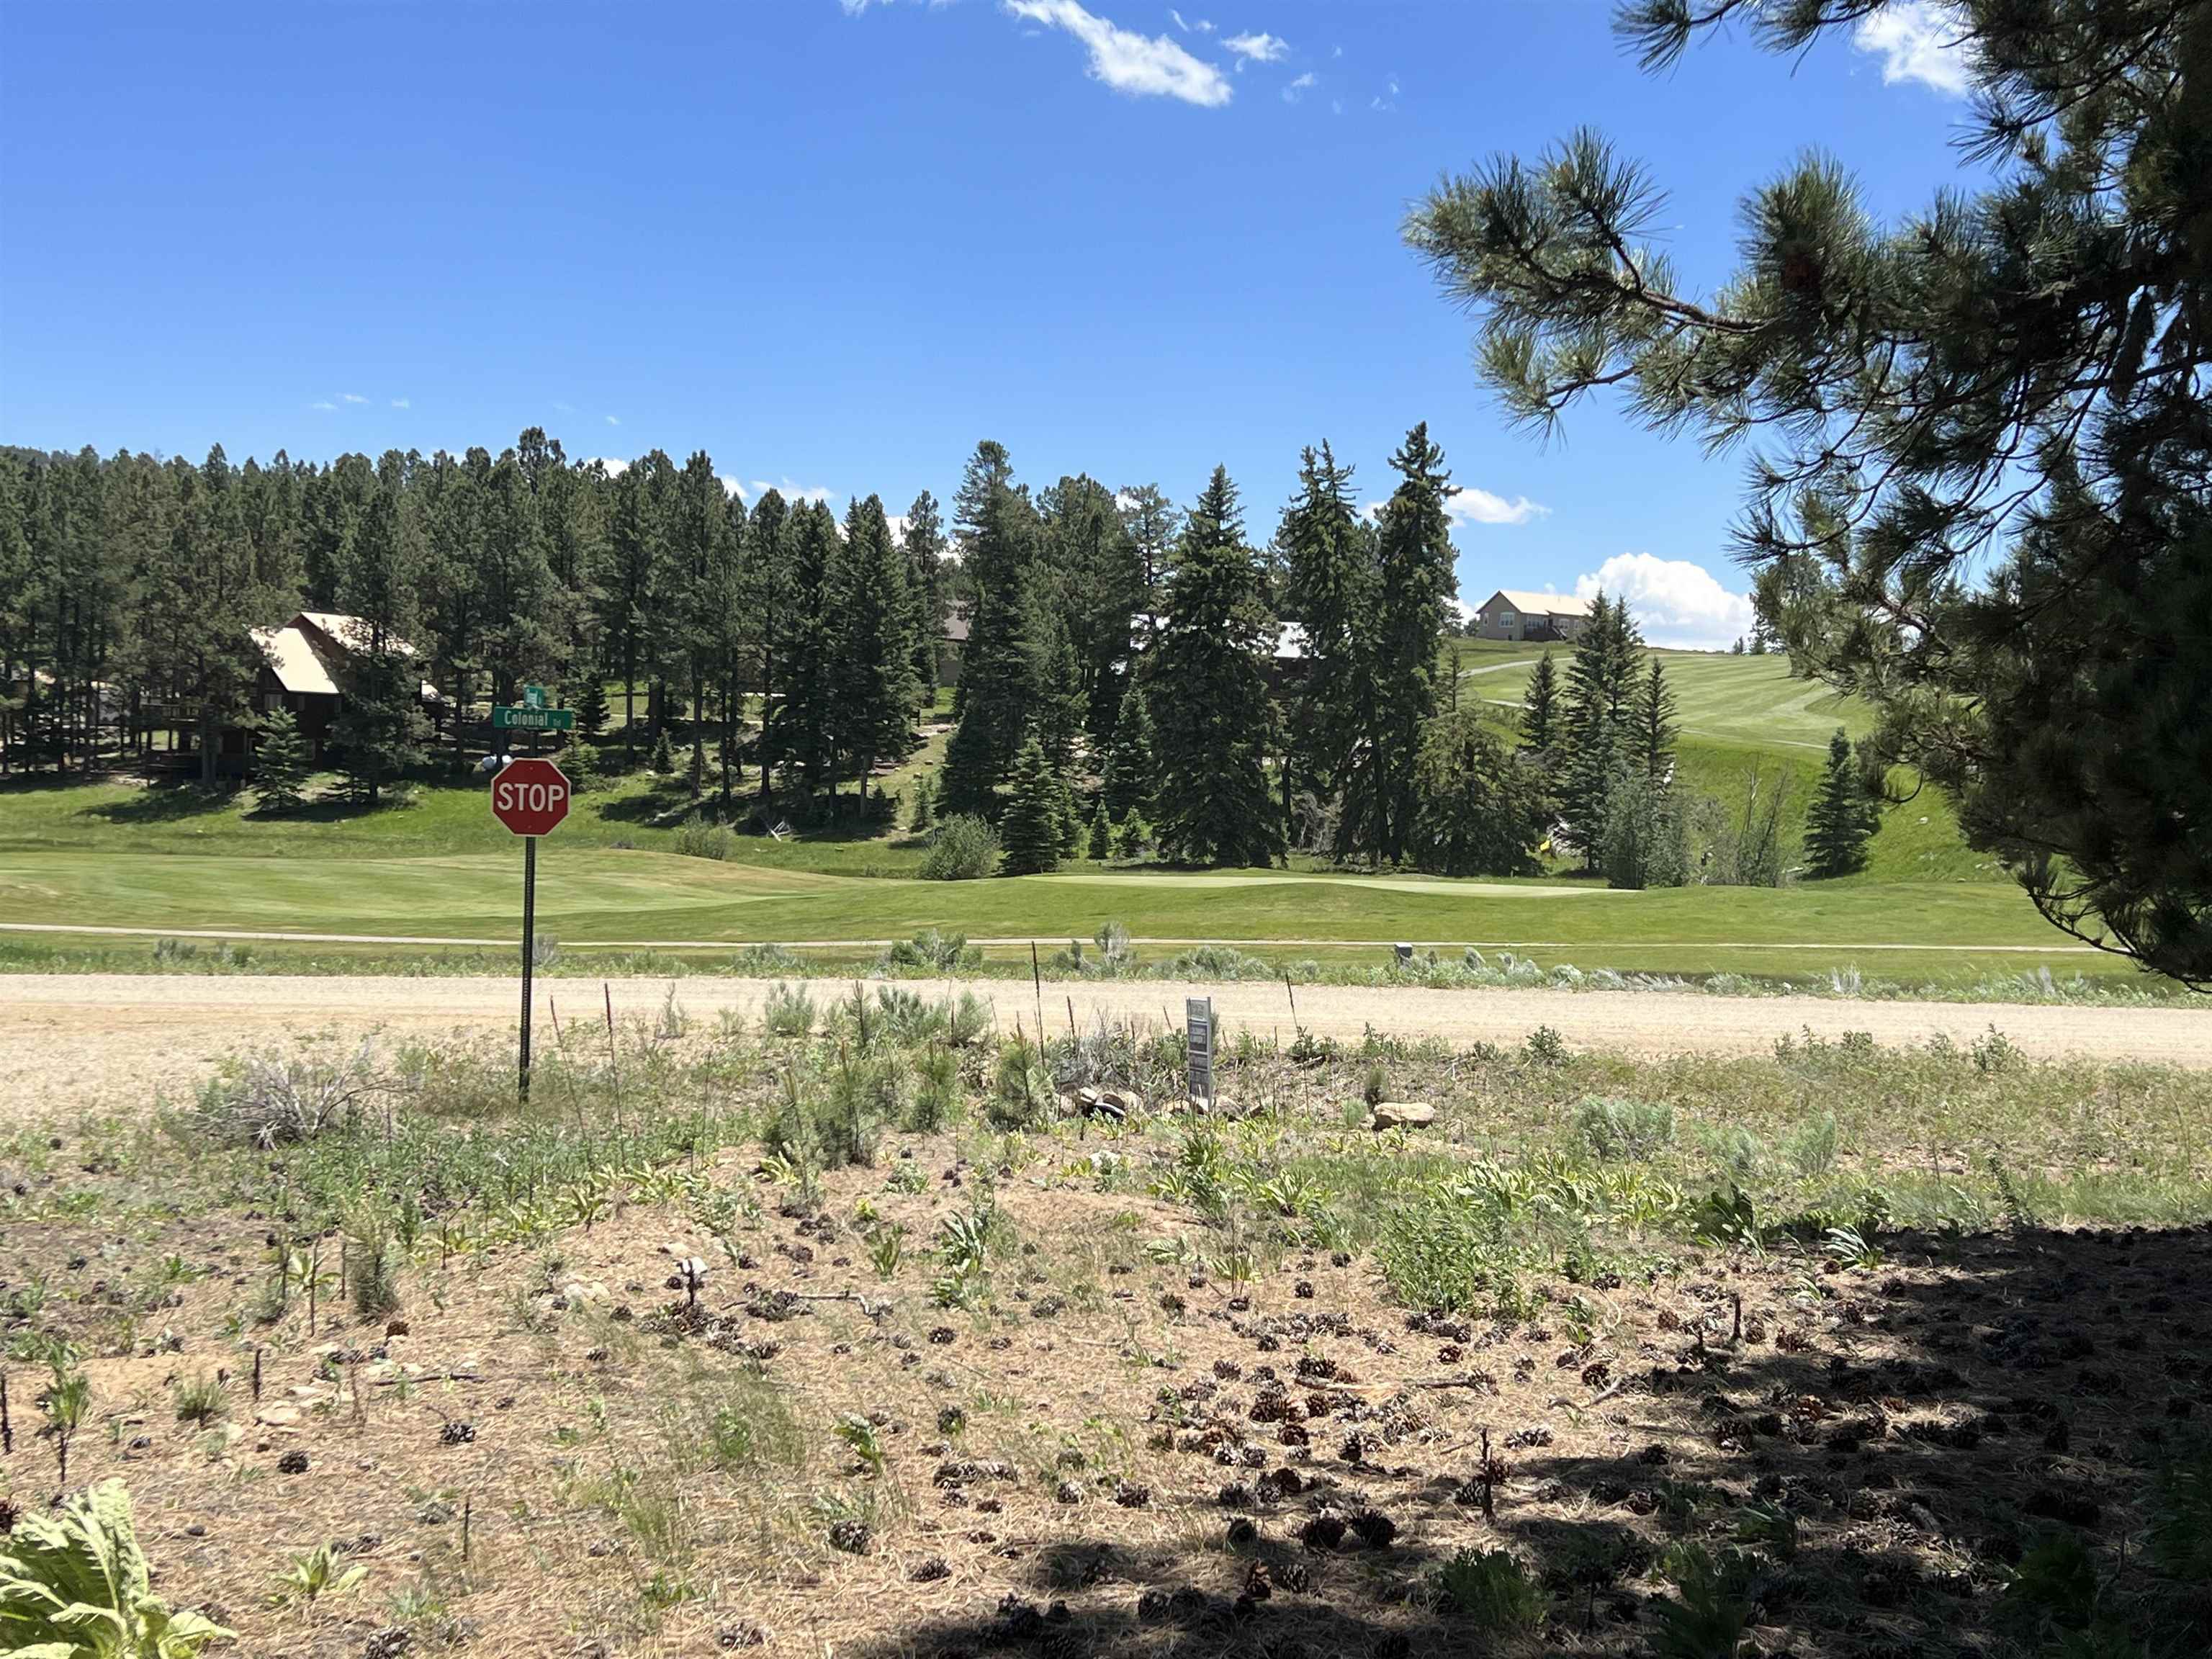 This extraordinary lot with majestic views is right next to the PGA rated golf course and just minutes from the Angel Fire Resort ski mountain, and other resort amenities including hiking trails, trout-stocked lake, country club, gym, tennis/pickleball courts and a nationally recognized mountain bike terrain park. Surrounded by other luxurious homes this is the perfect lot to build your dream home.